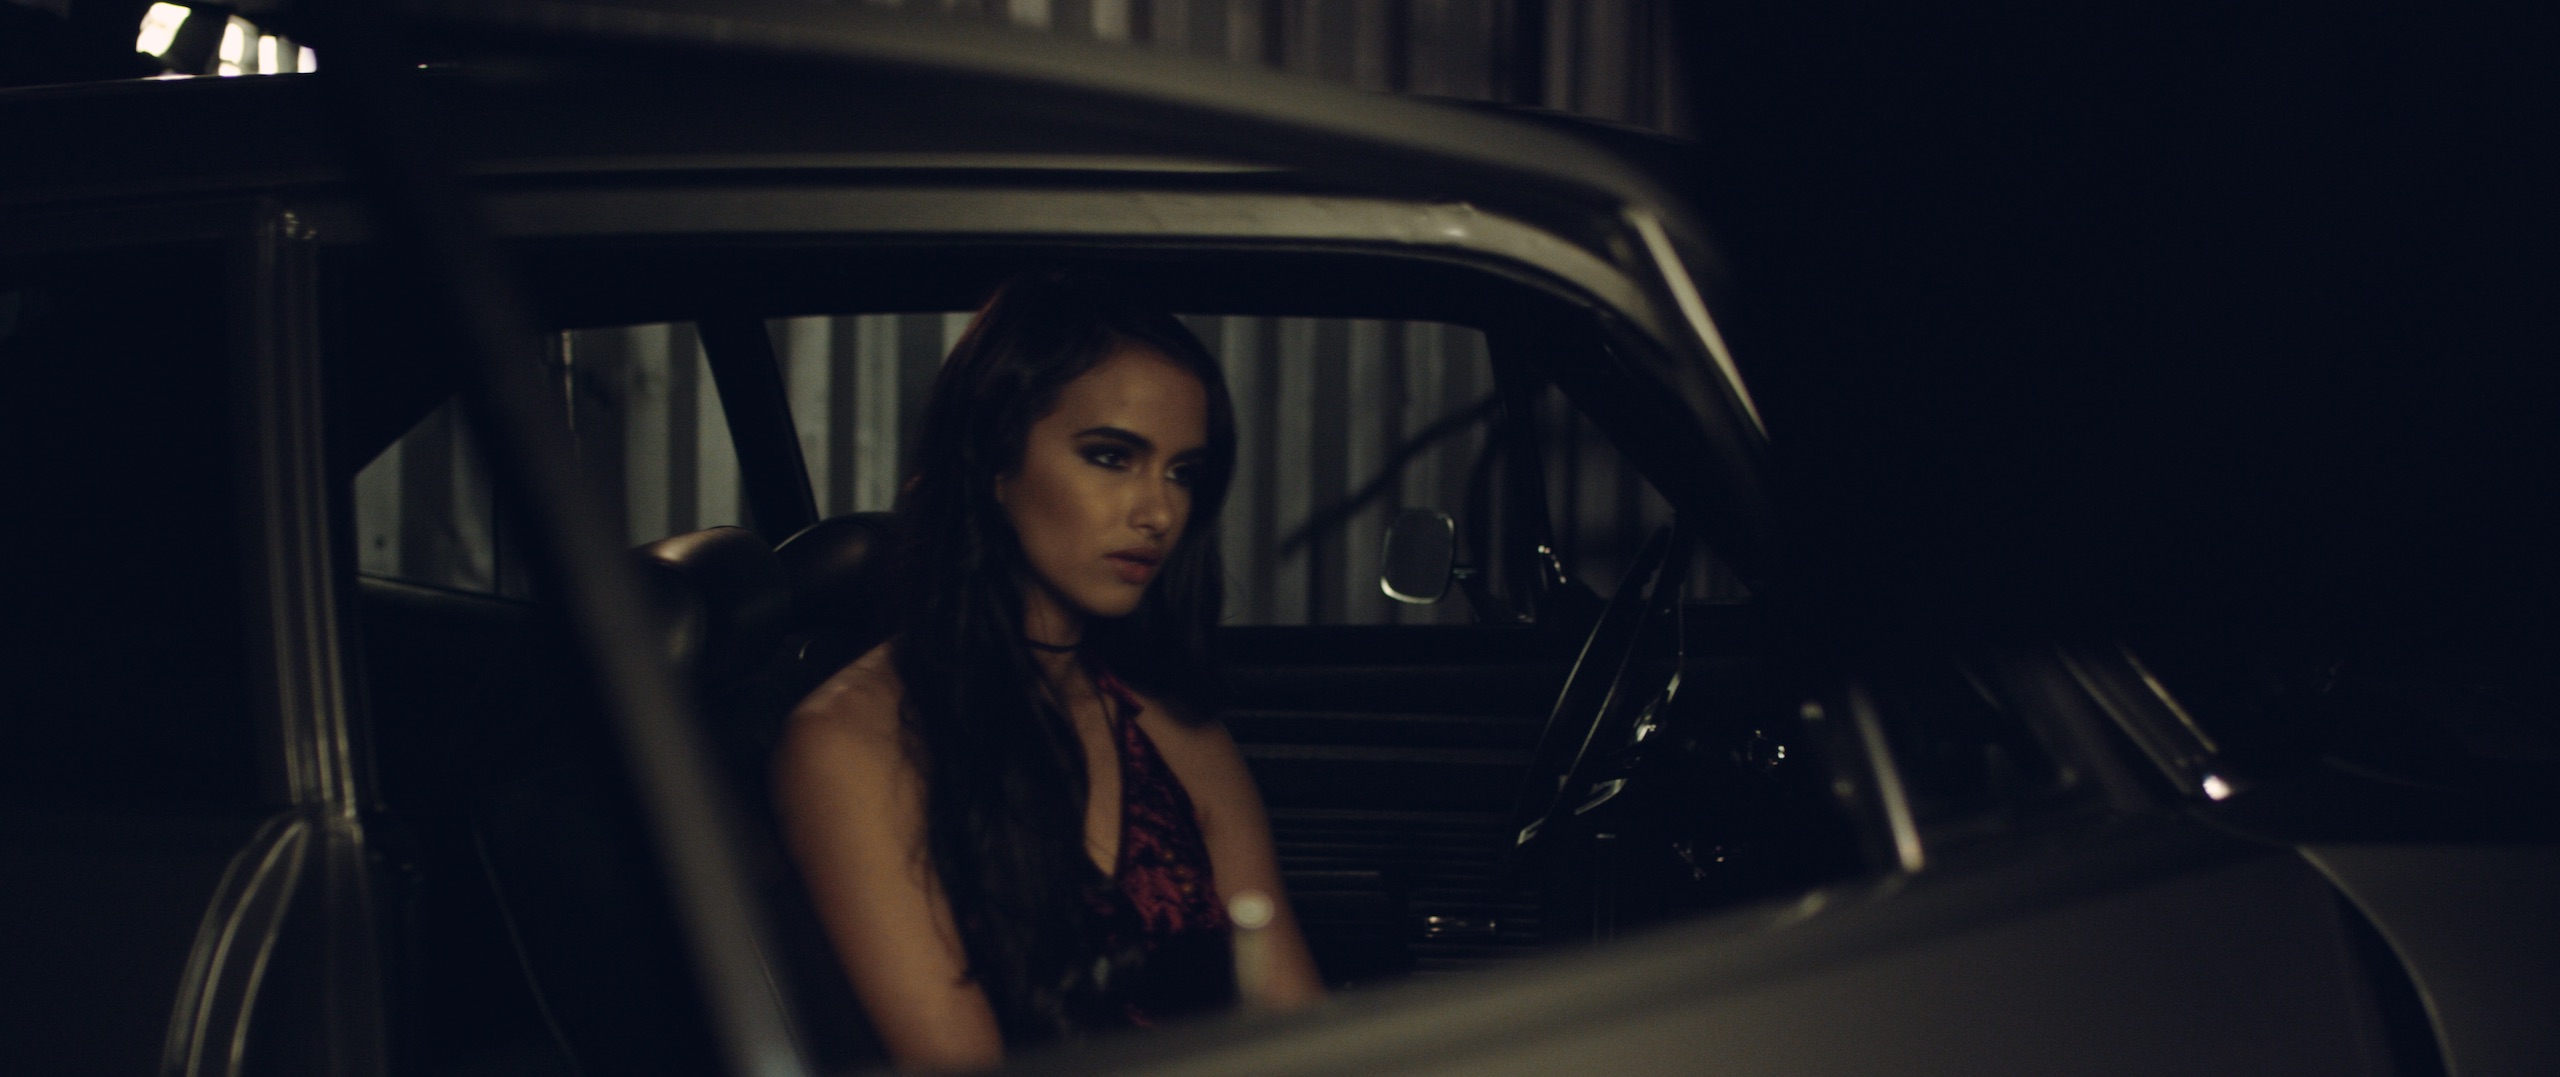 The Dailies Episode 202 BTS Footage with closeup headshot of Mercedes Gutierrez sitting in the driver's seat of a car